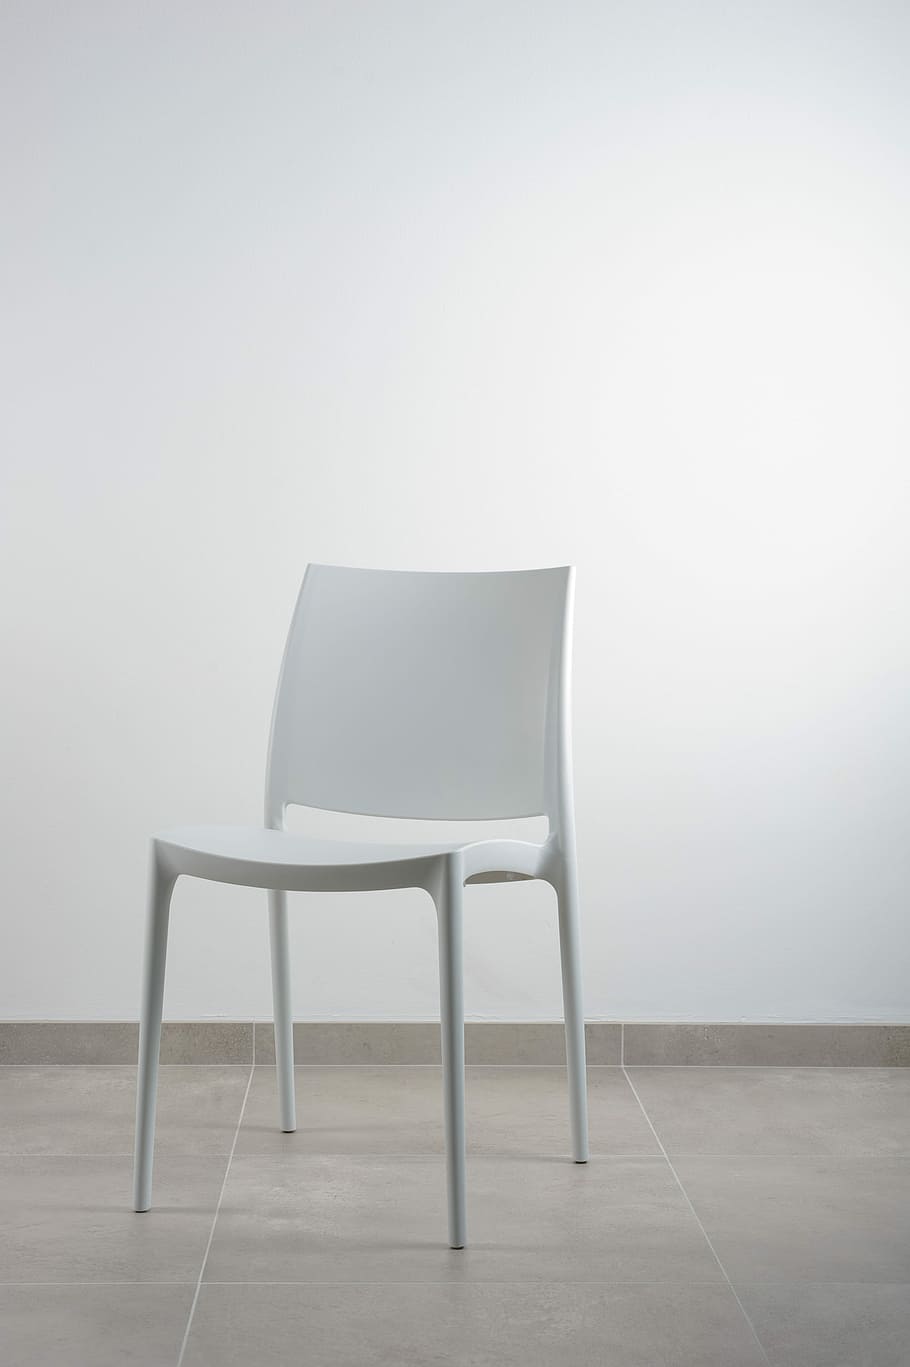 white armless chair near white wall, white chair in front of white wall